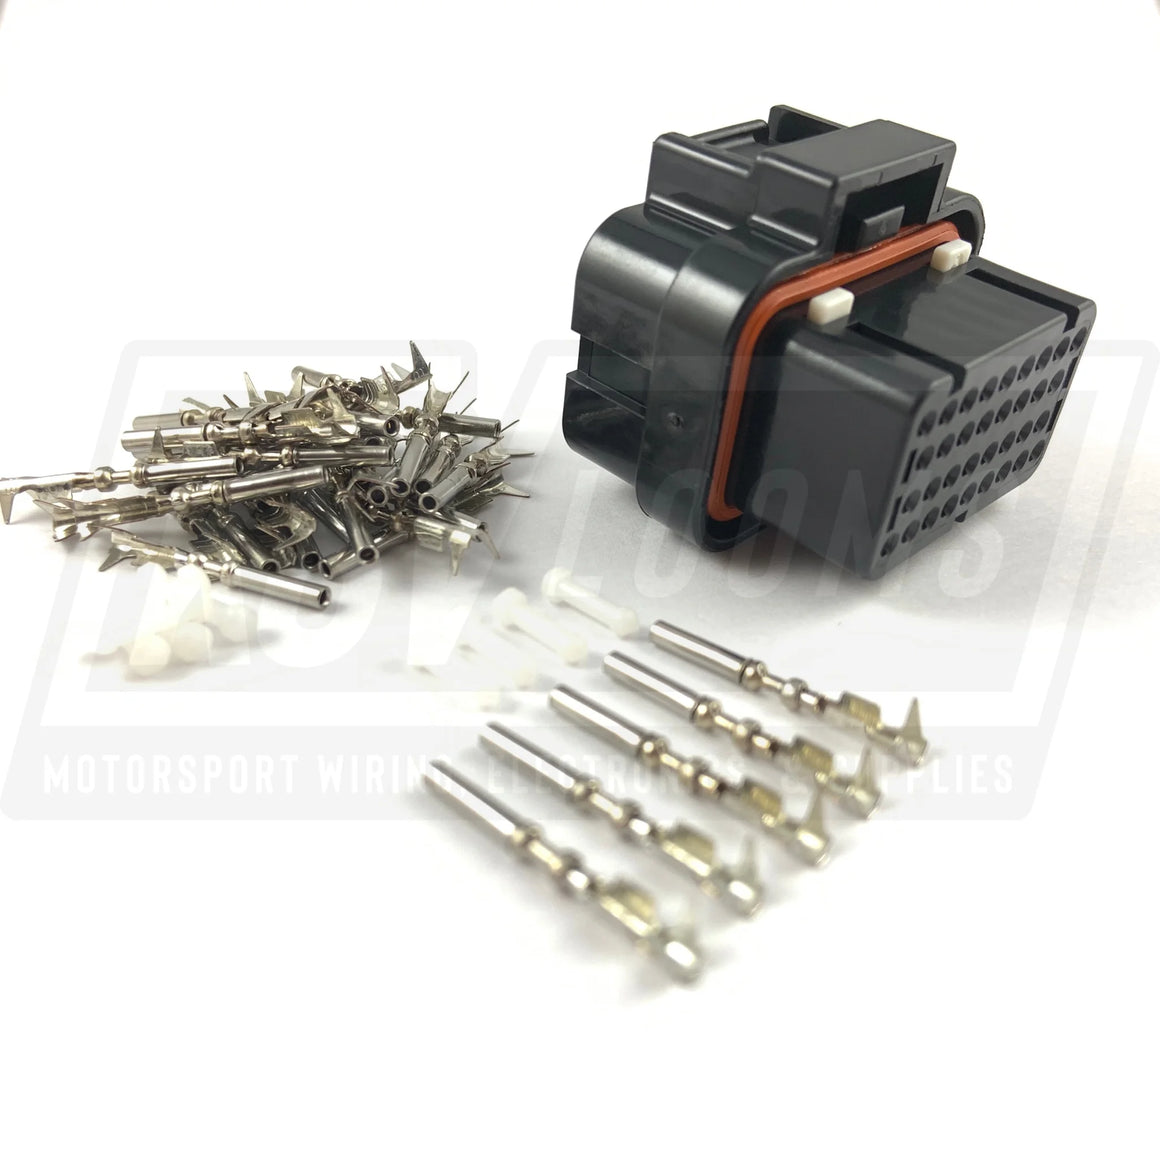 34-Way Connector Kit For Motec C125 Dash Display (24-20 Awg)